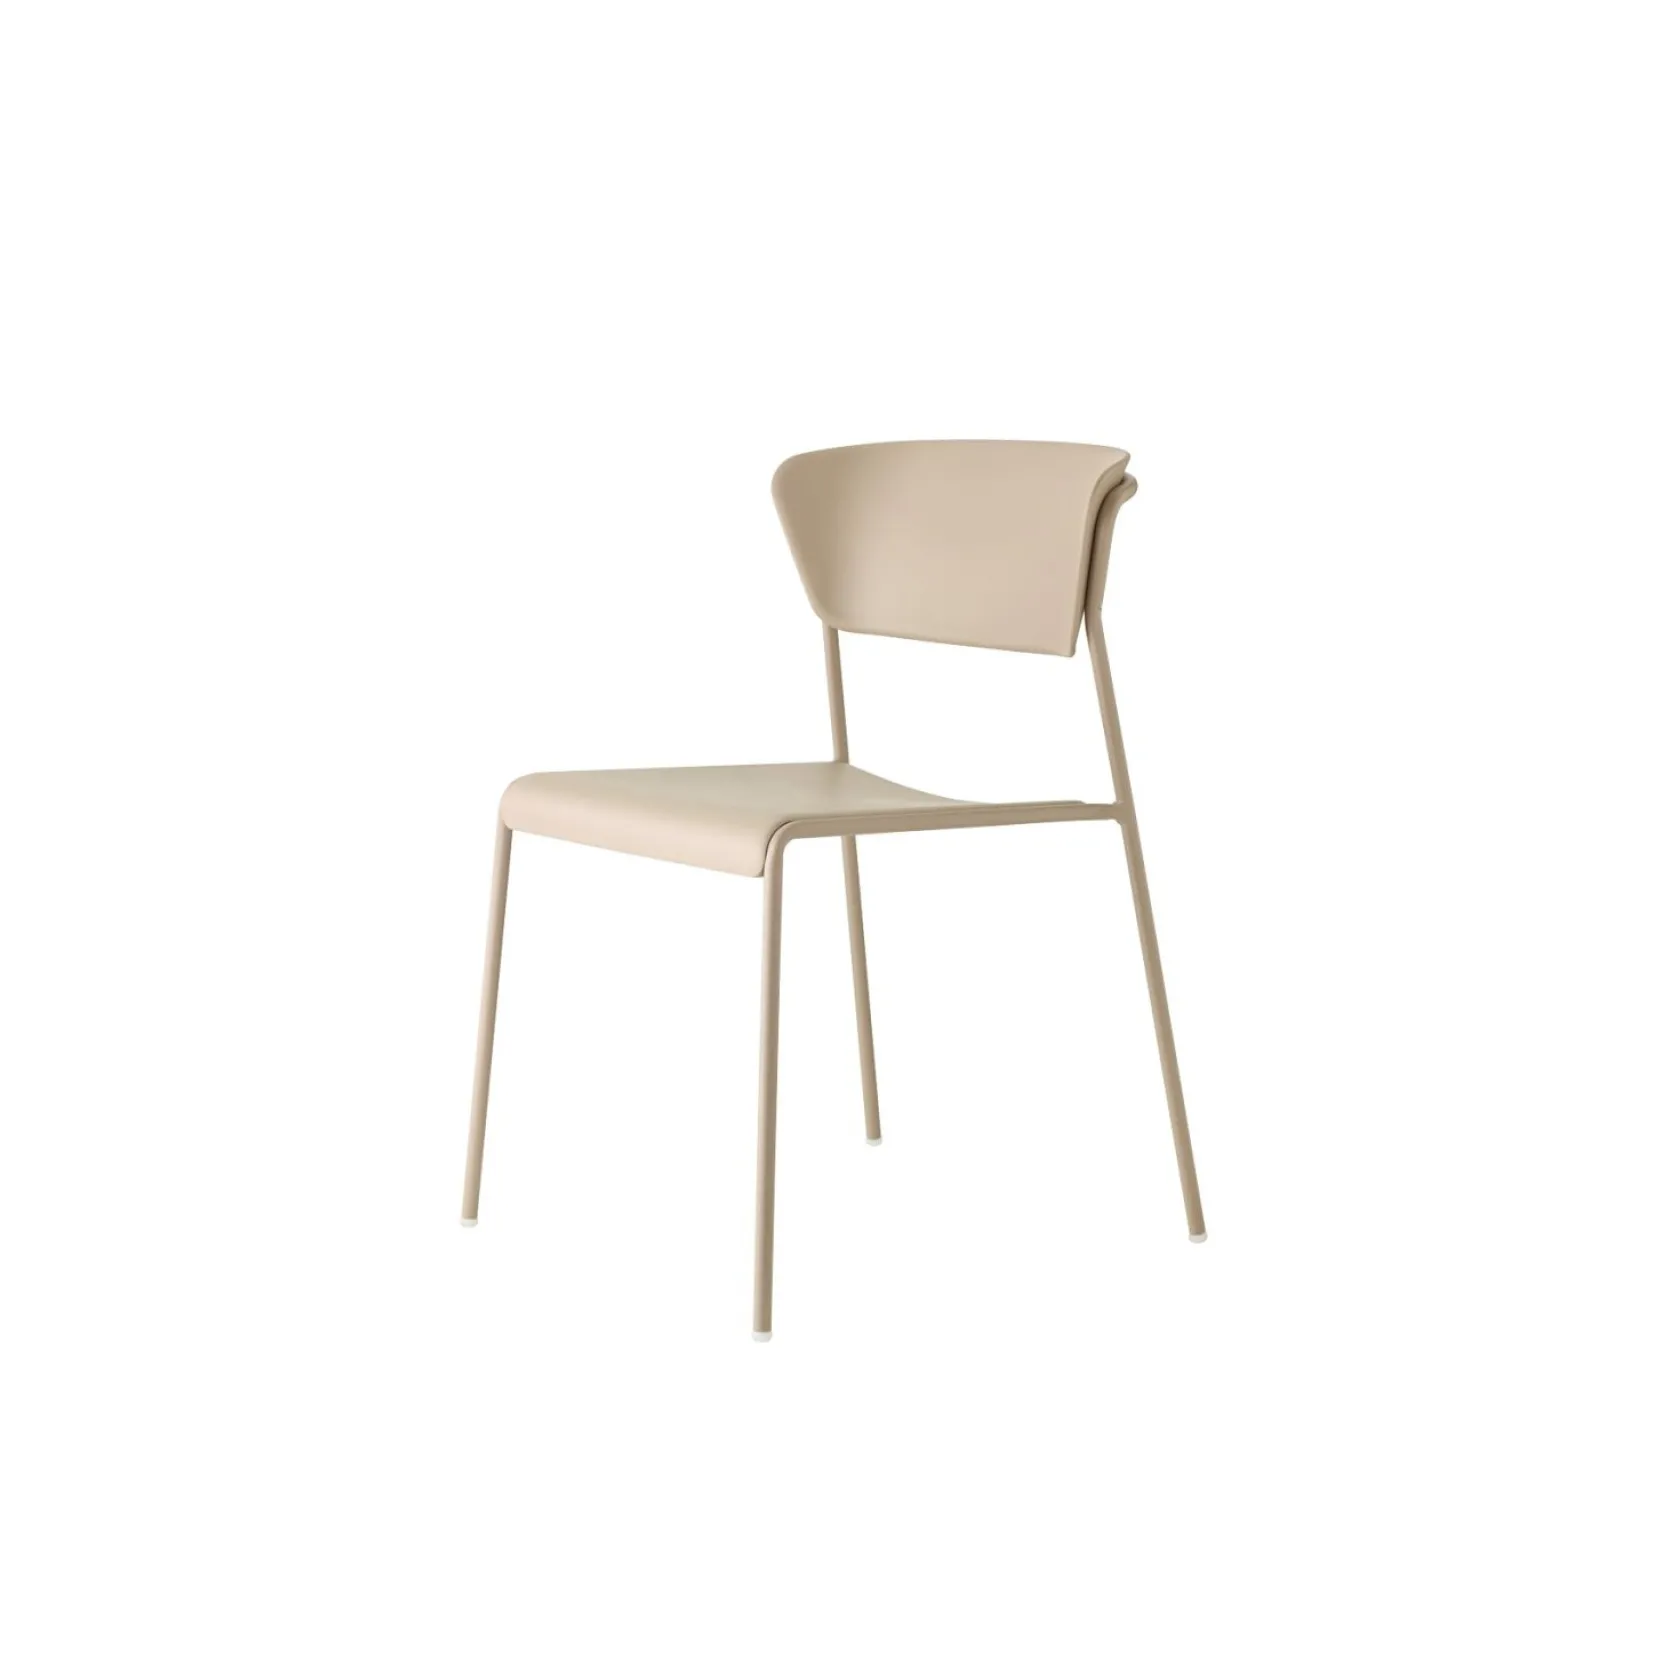 WIRED Sled base steel chair By La Manufacture